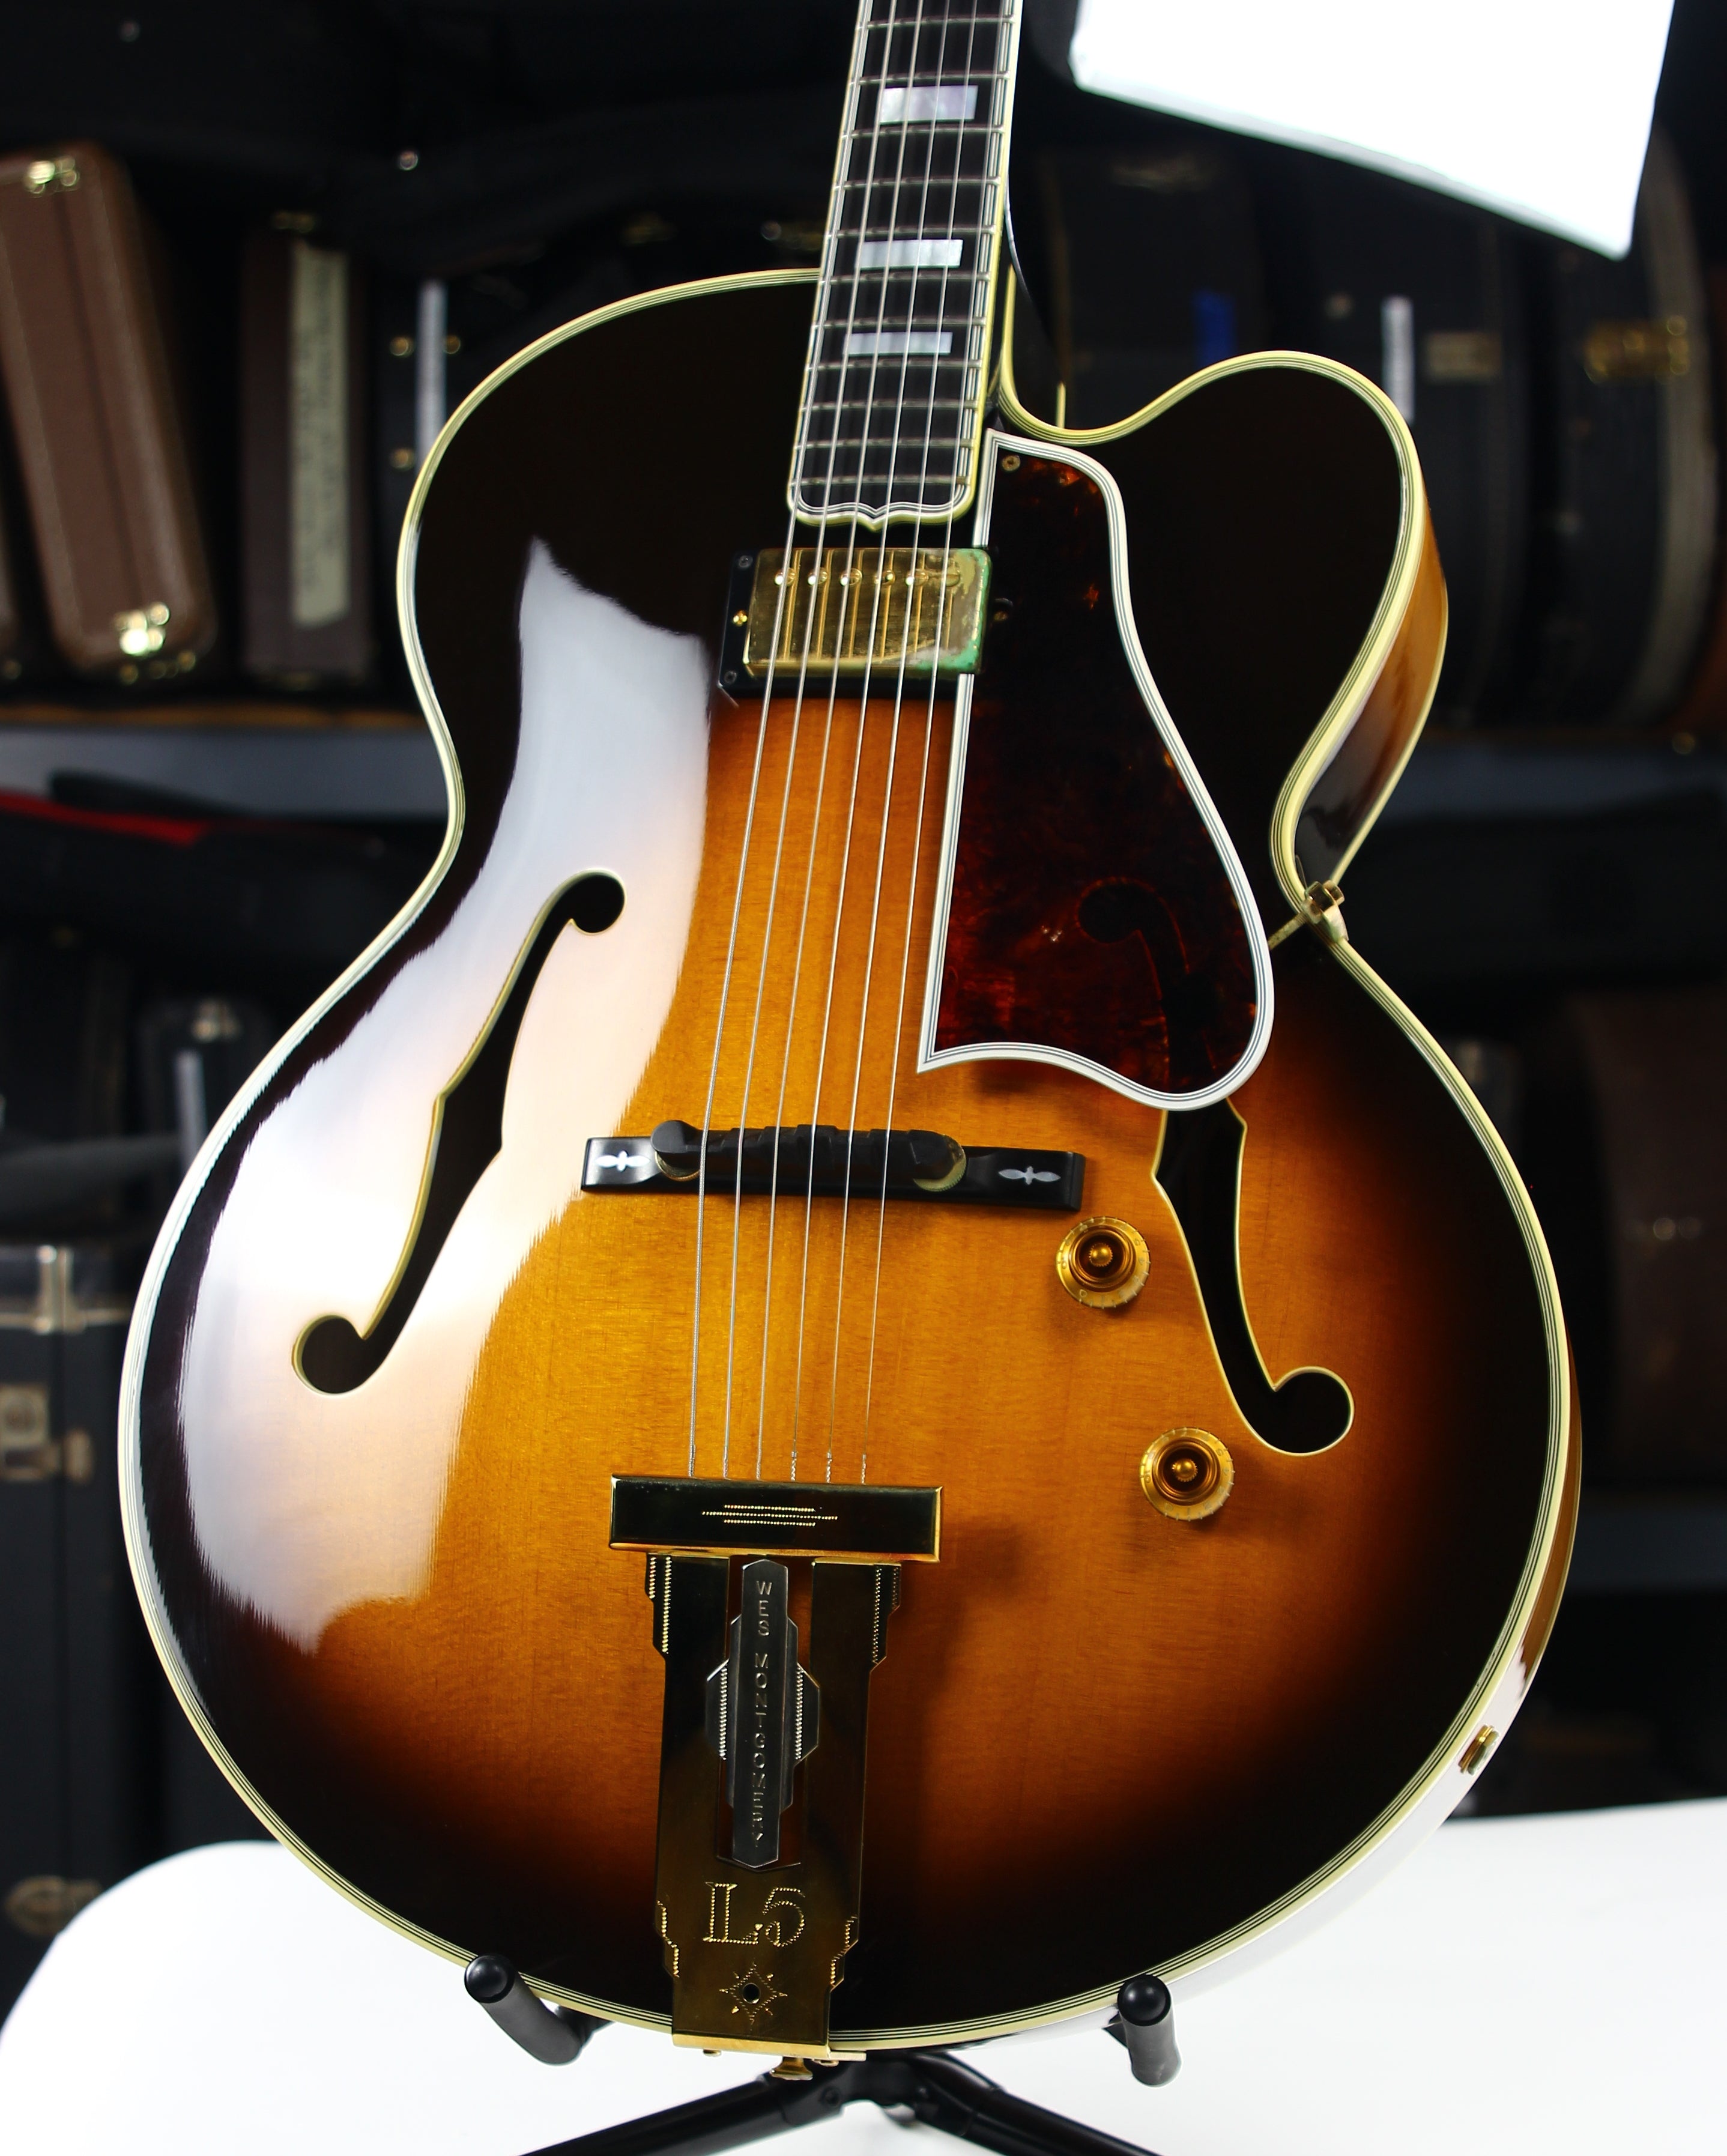 *SOLD*  1994 Gibson MASTER MODEL L-5 Wes Montgomery Sunburst - Custom Shop, w/ COA and Case Cover!